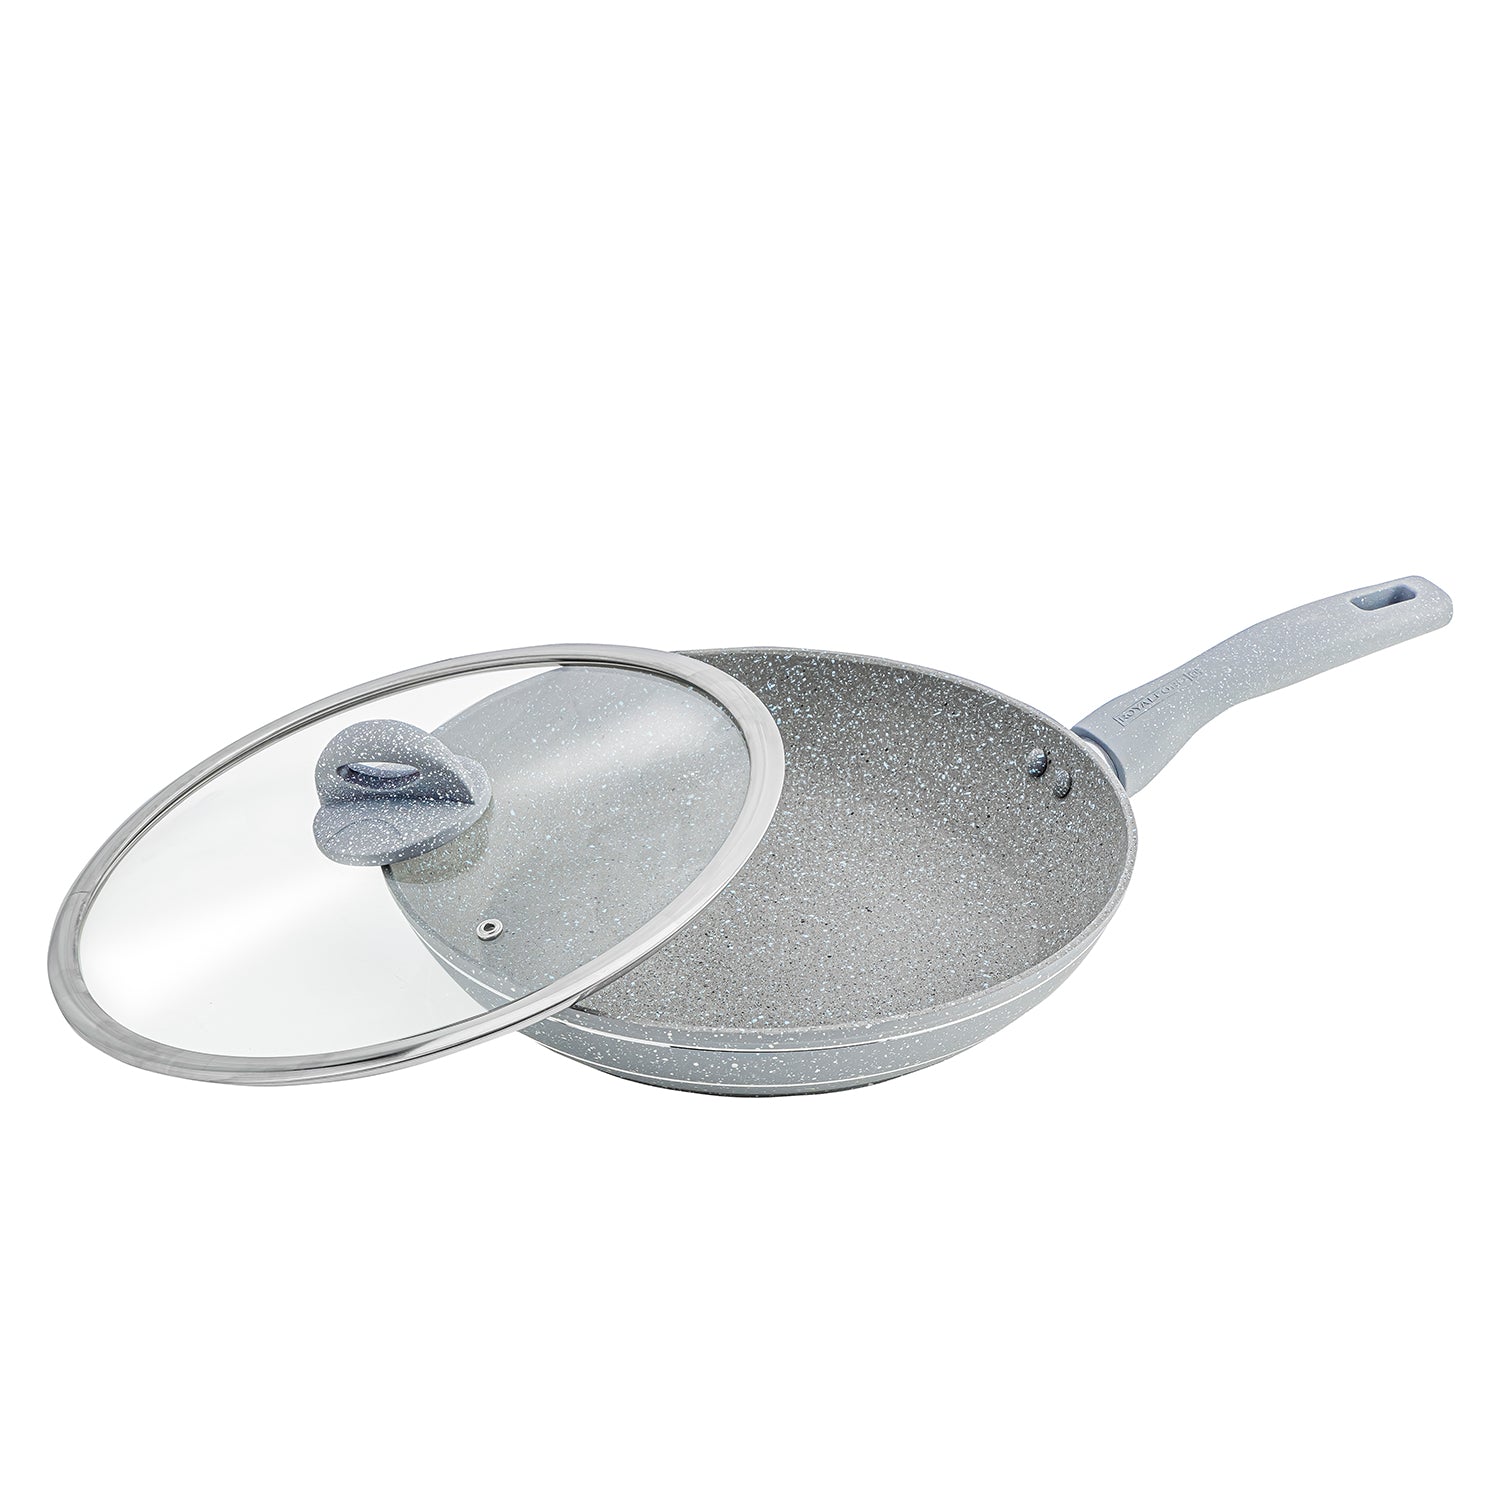 26cm Aluminium Non-Stick Frying Pan with Glass Lid